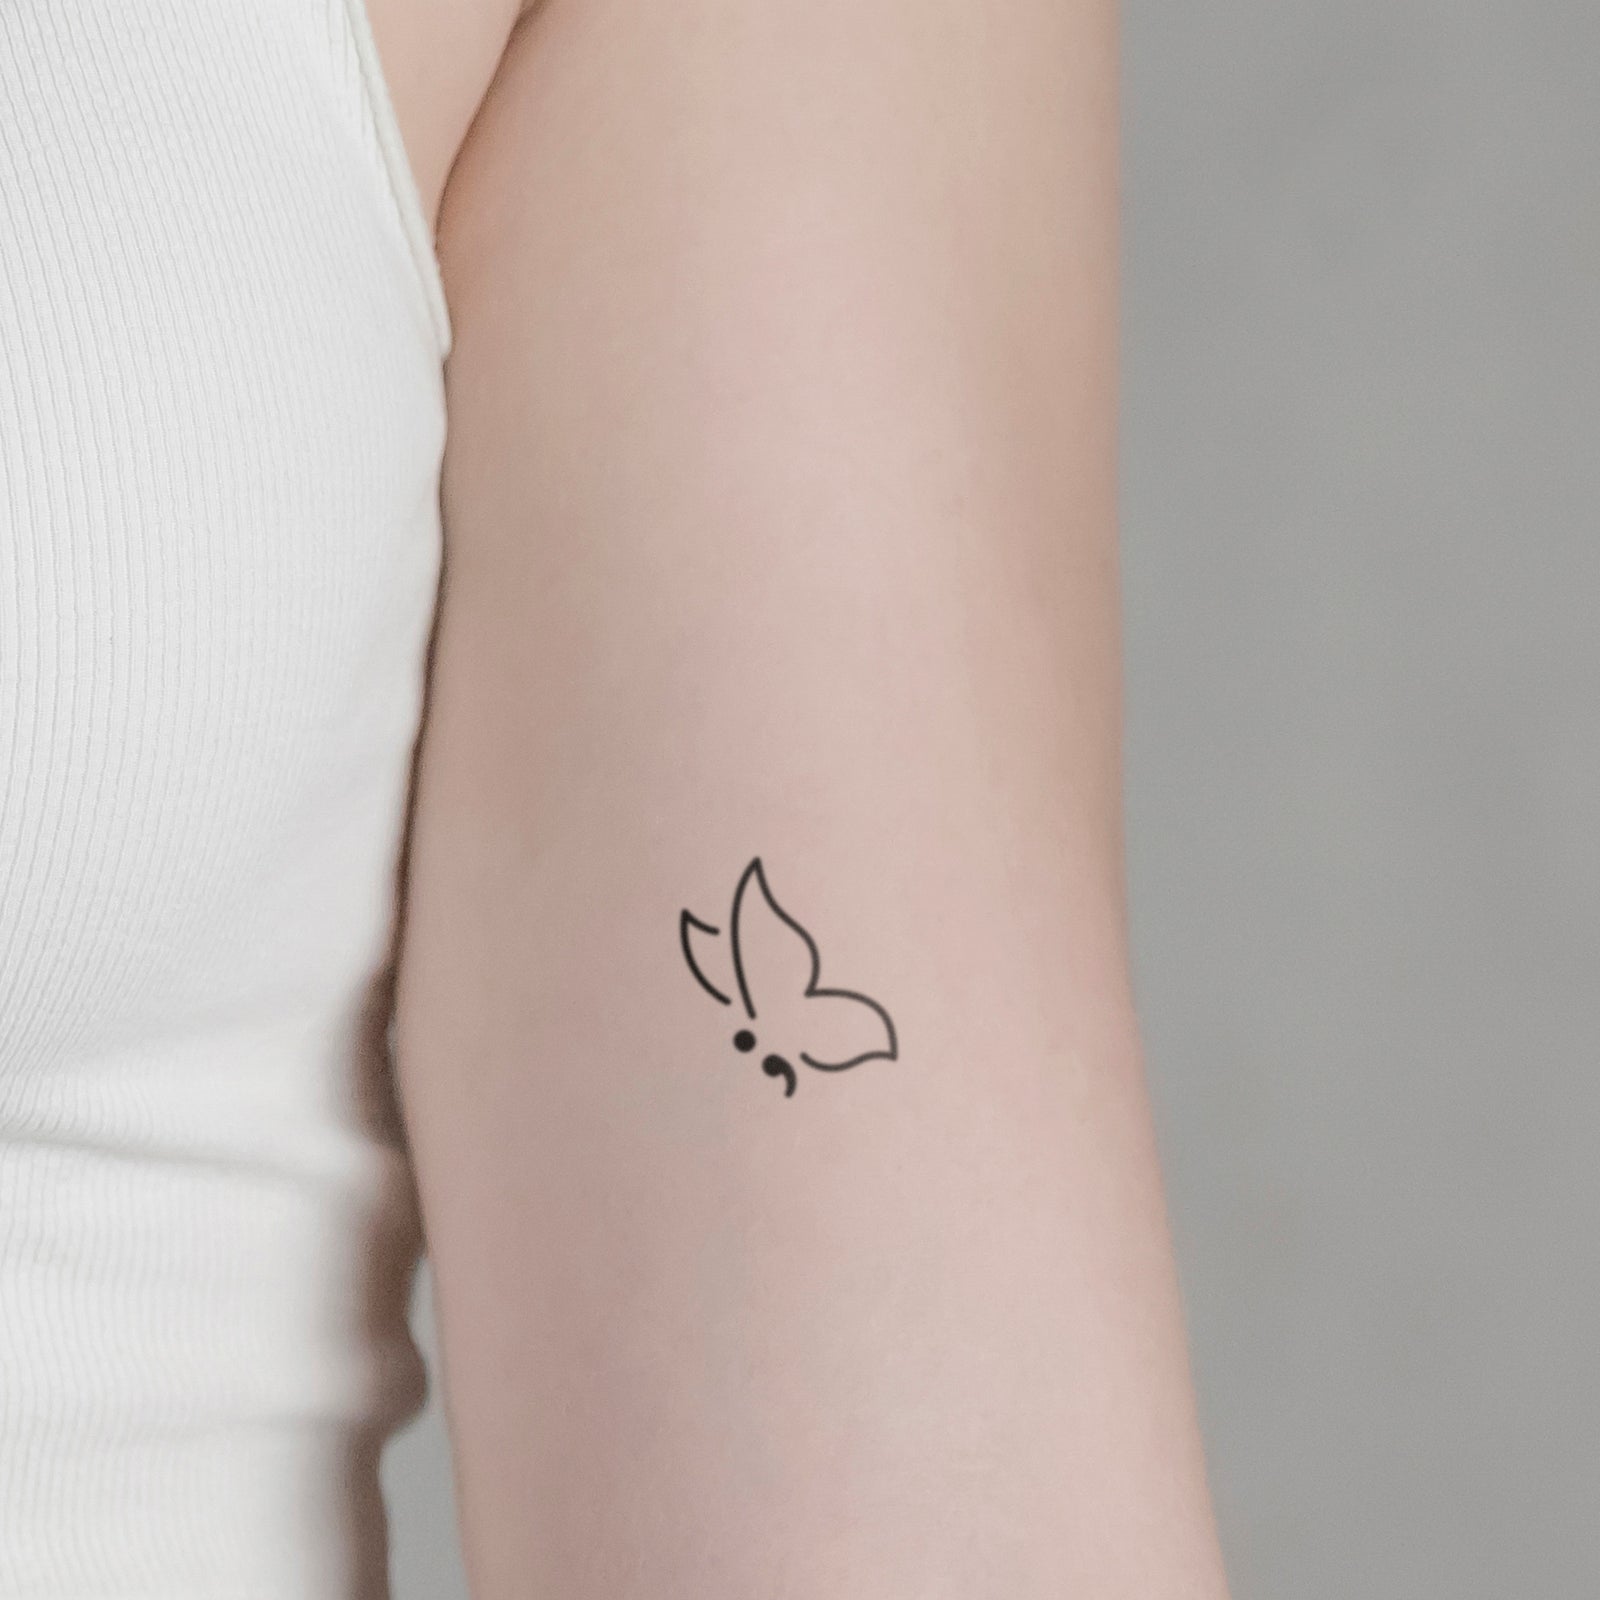 Flora And Fauna Tattoos Inspired By Vintage Science Drawings | DeMilked